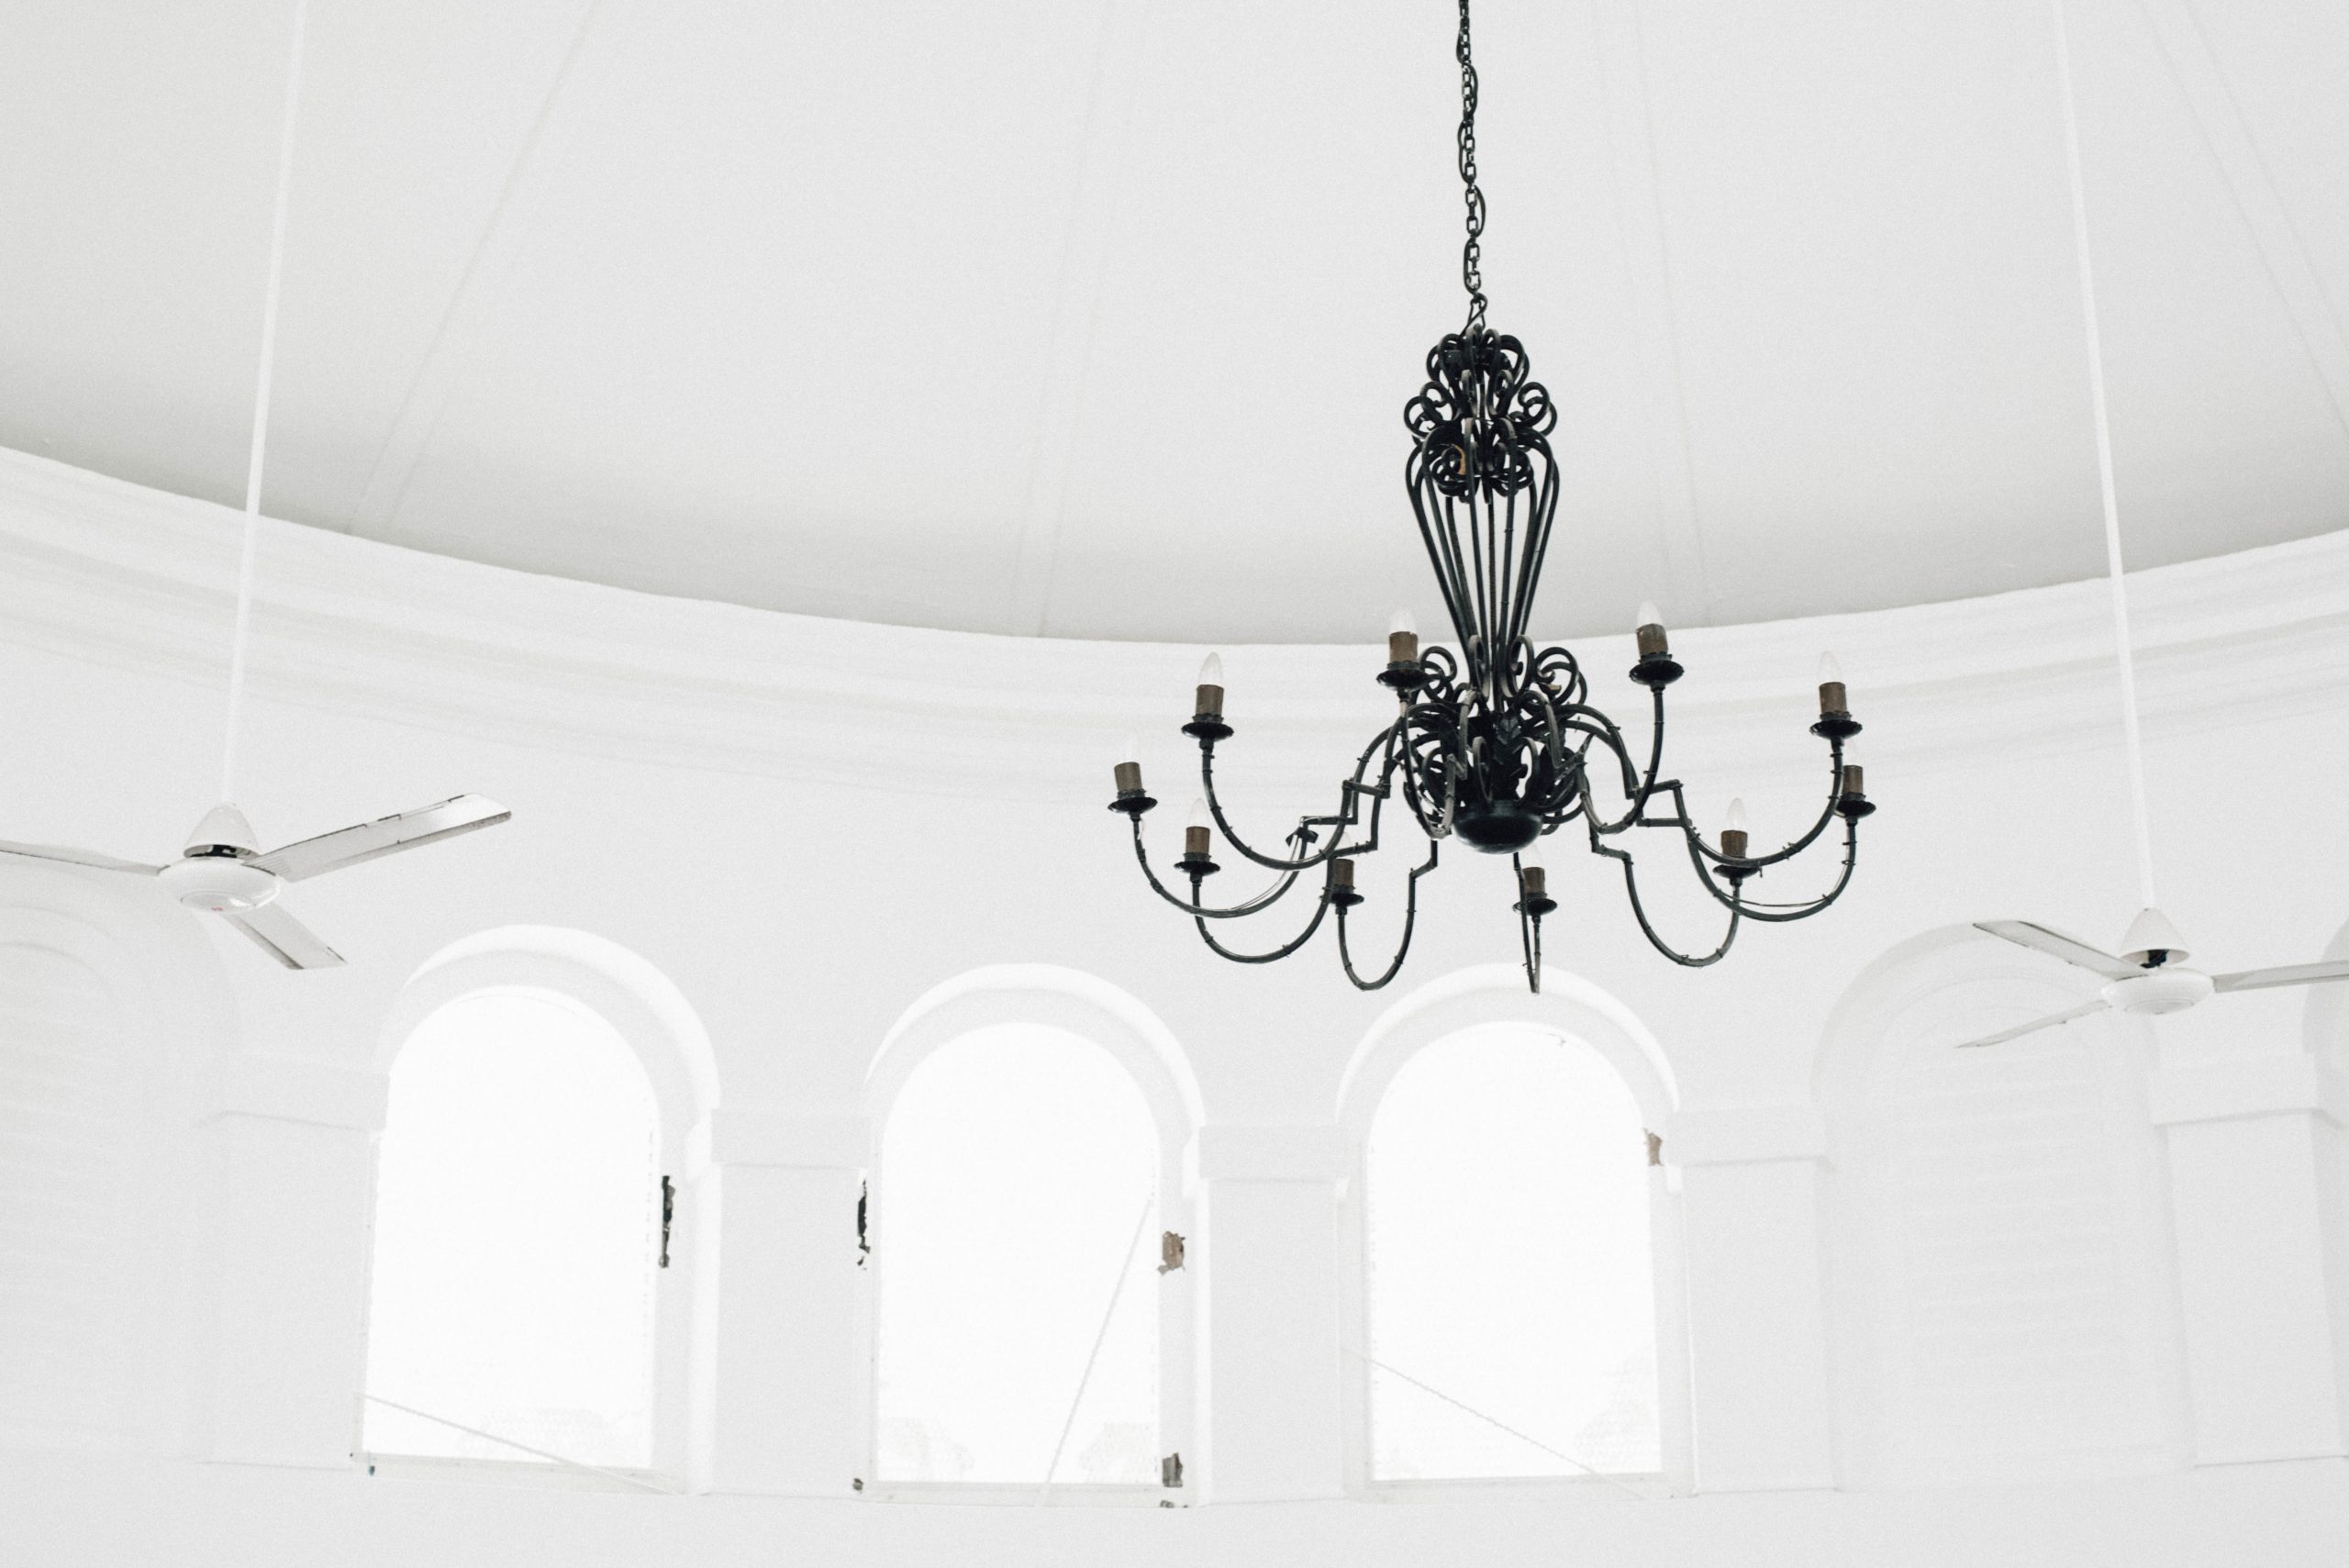 What interiors do chandeliers fit into?